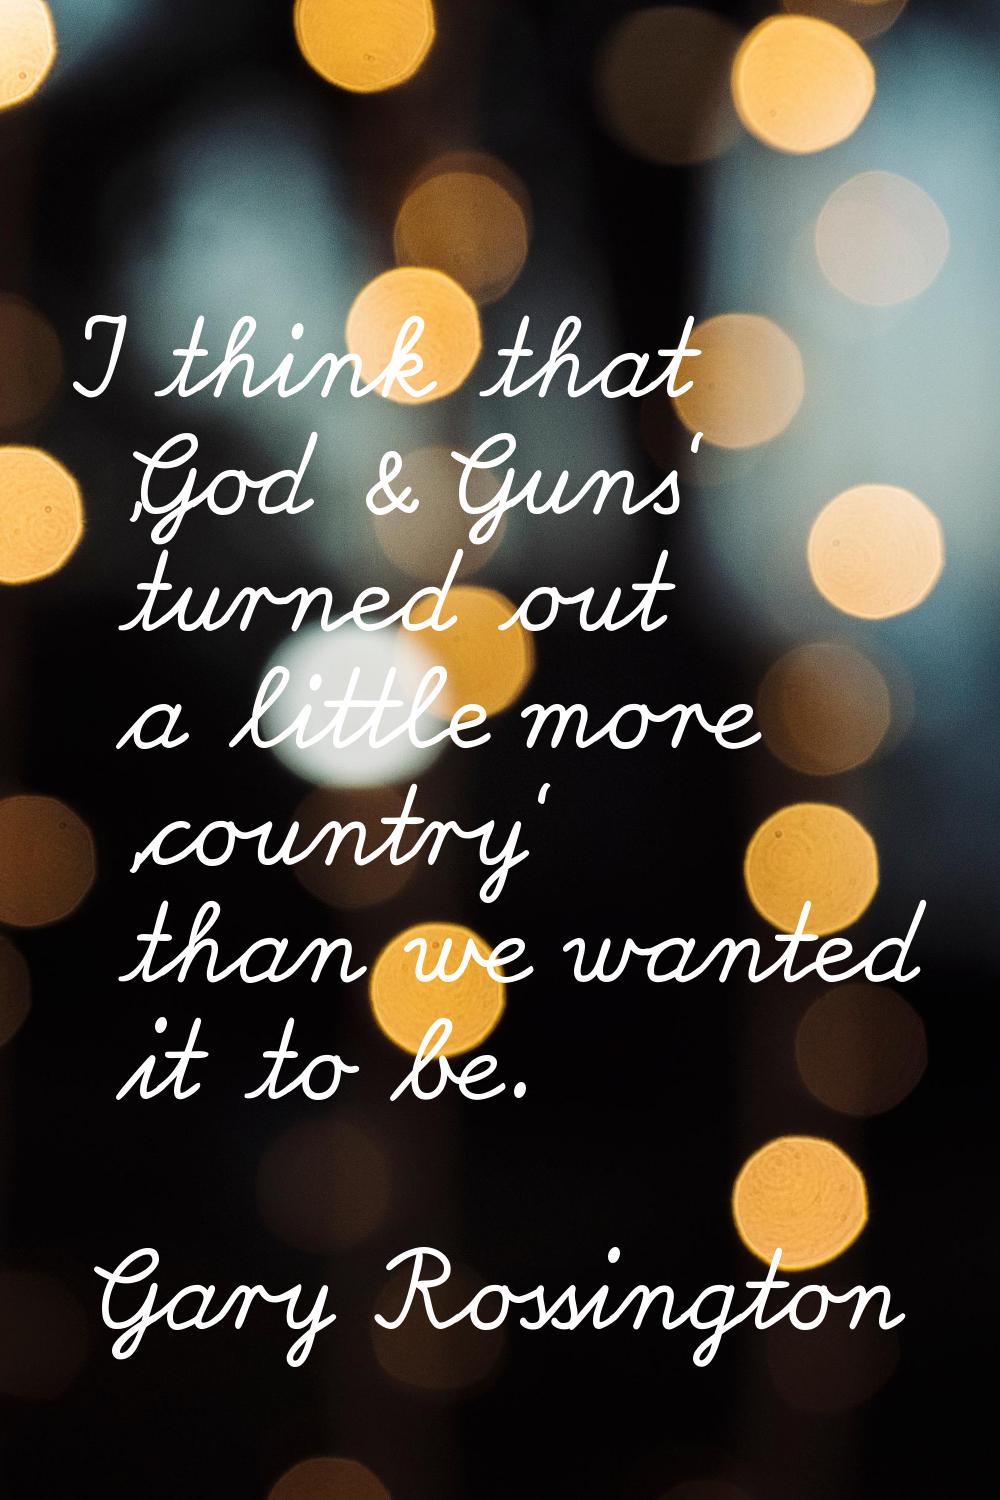 I think that 'God & Guns' turned out a little more 'country' than we wanted it to be.